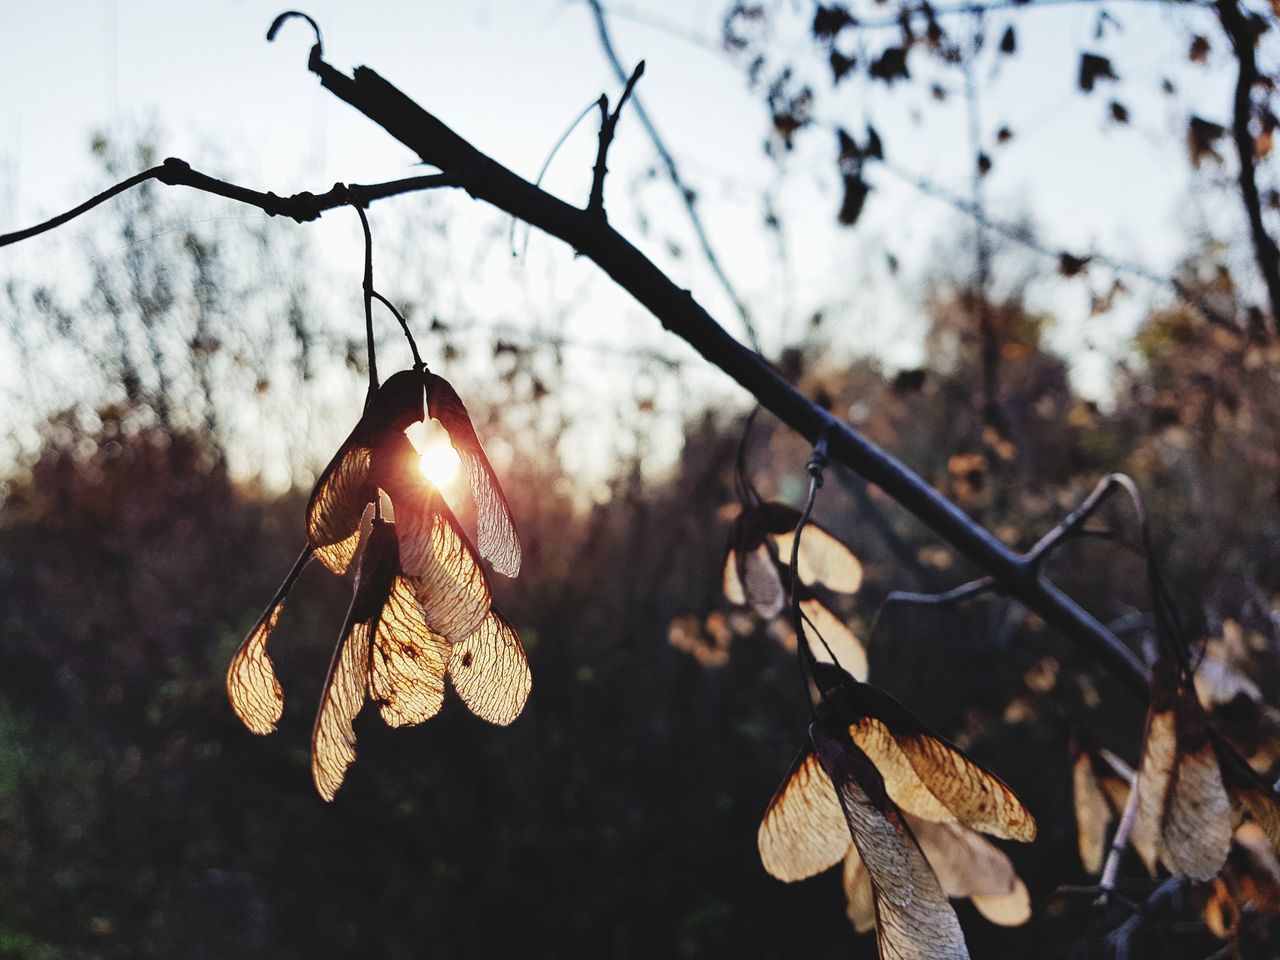 LOW ANGLE VIEW OF DRY LEAVES HANGING ON TREE BRANCH